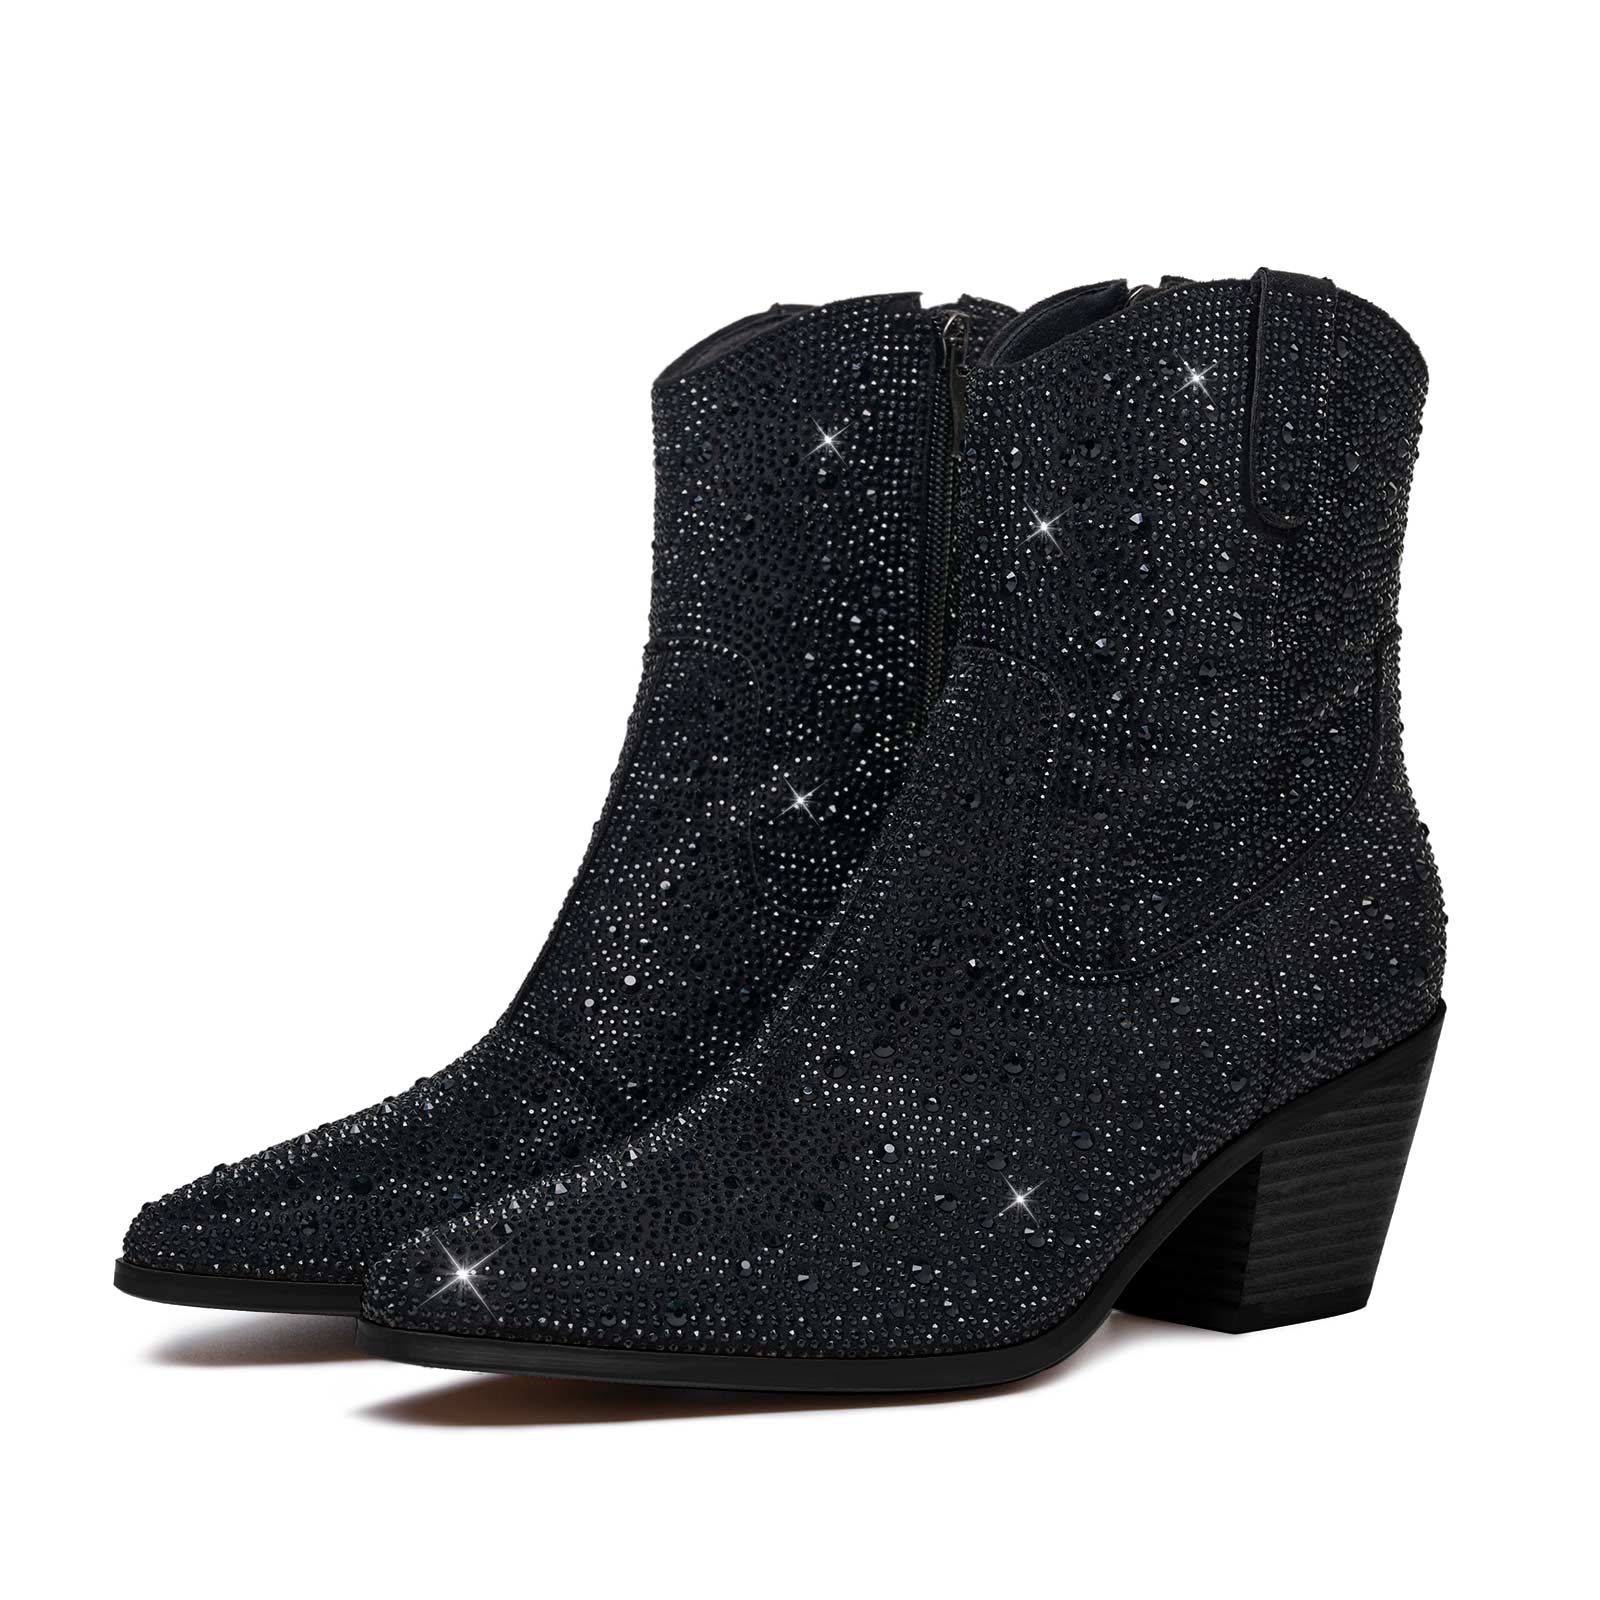 Rhinestone Cowboy Boots Sparkly Ankle Cowgirl Booties